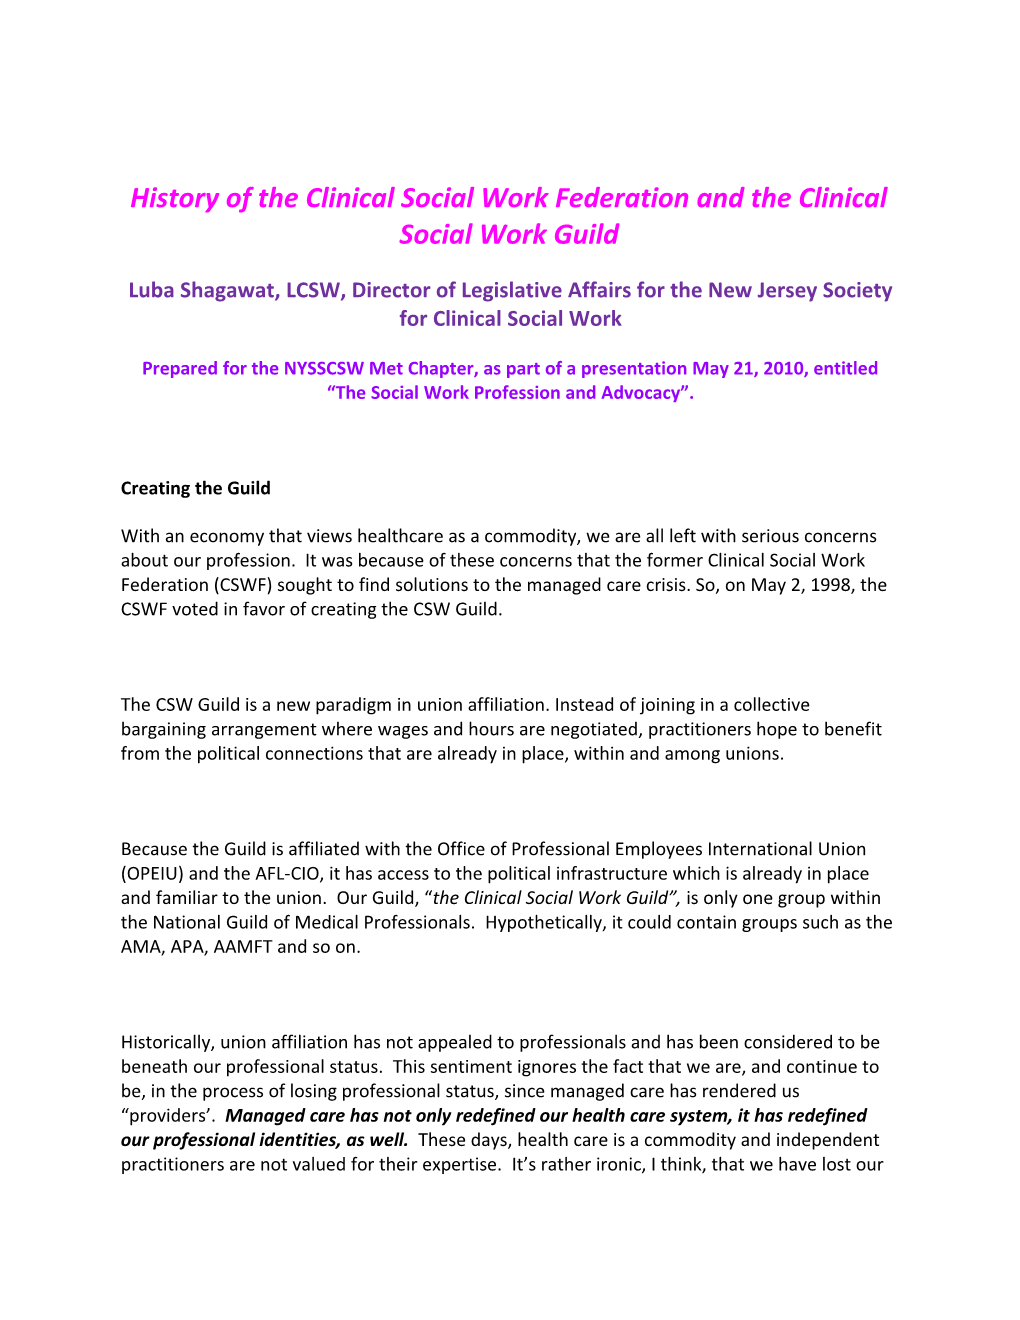 History of the Clinical Social Work Federation and the Clinical Social Work Guild